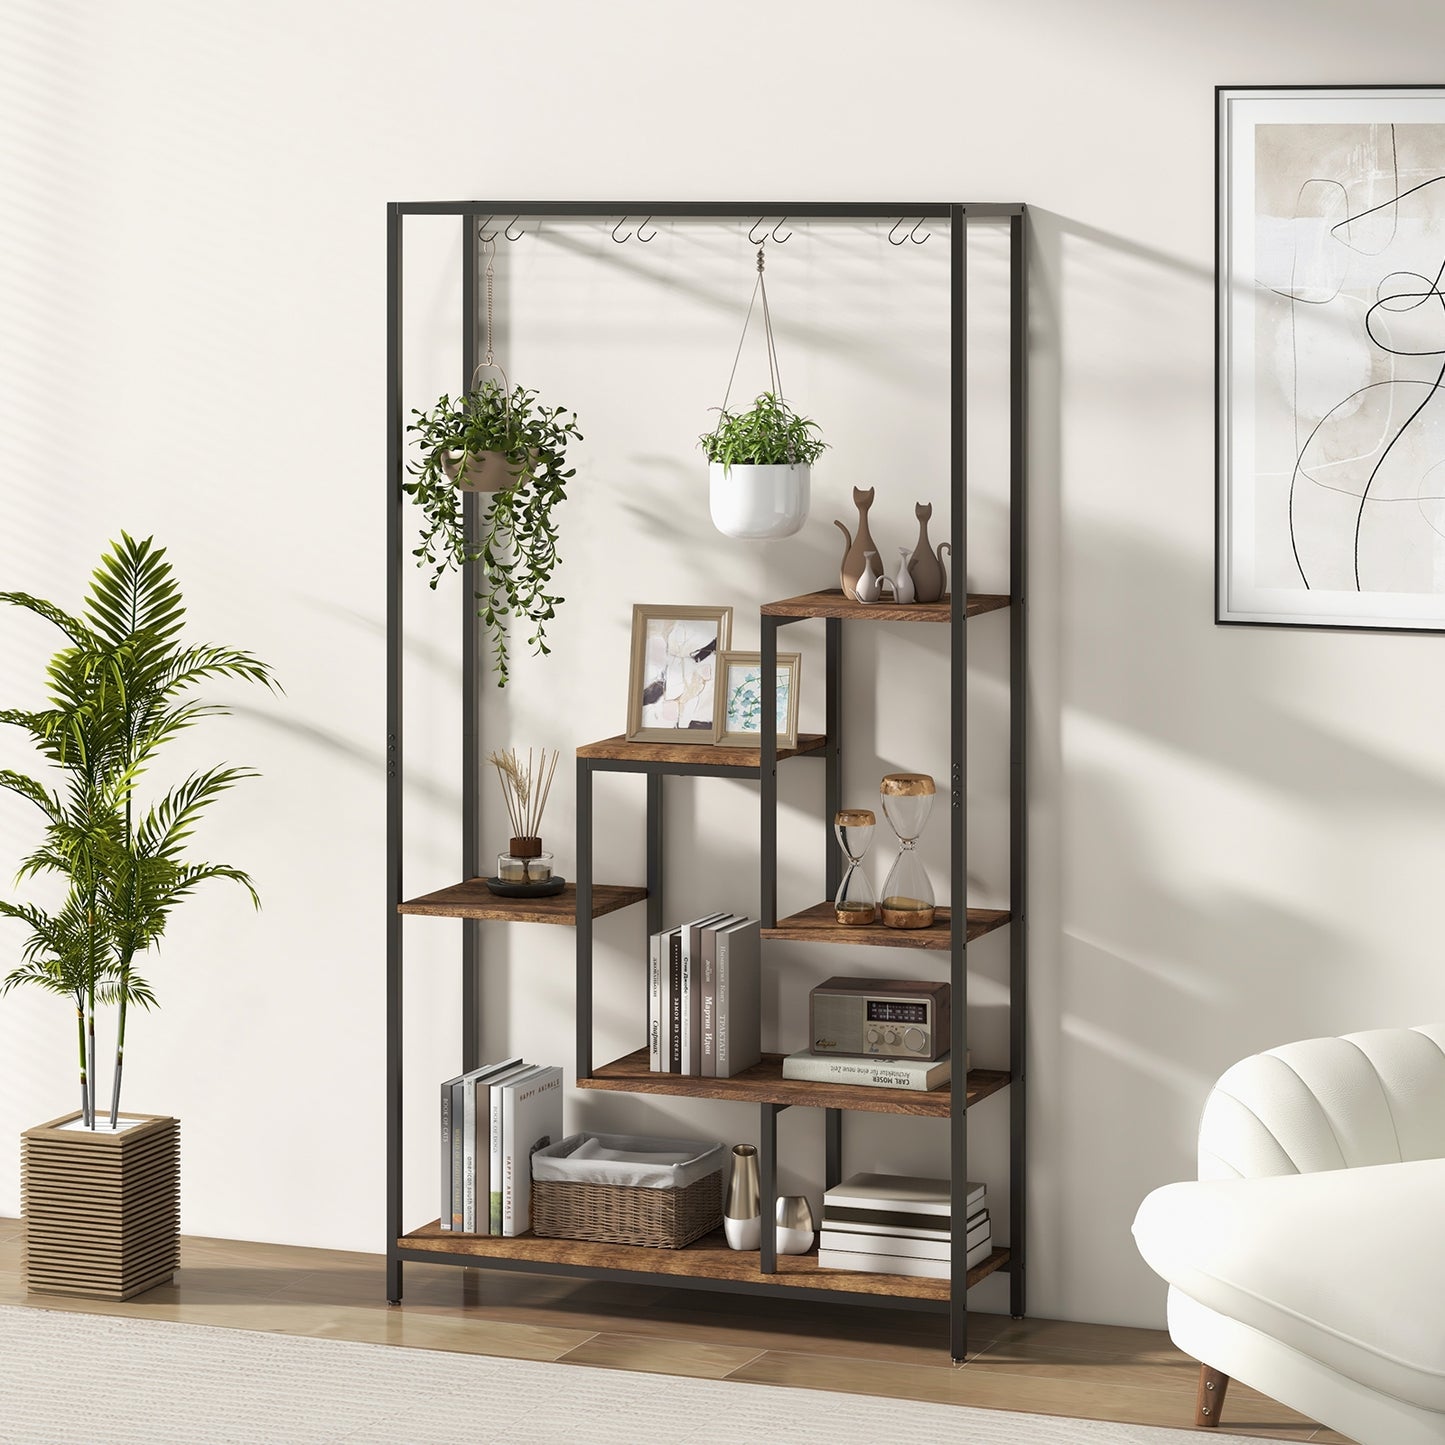 6-Tier Tall Plant Stand 71" Metal Indoor Plant Shelf with 10 Hanging Hooks-Rustic Brown